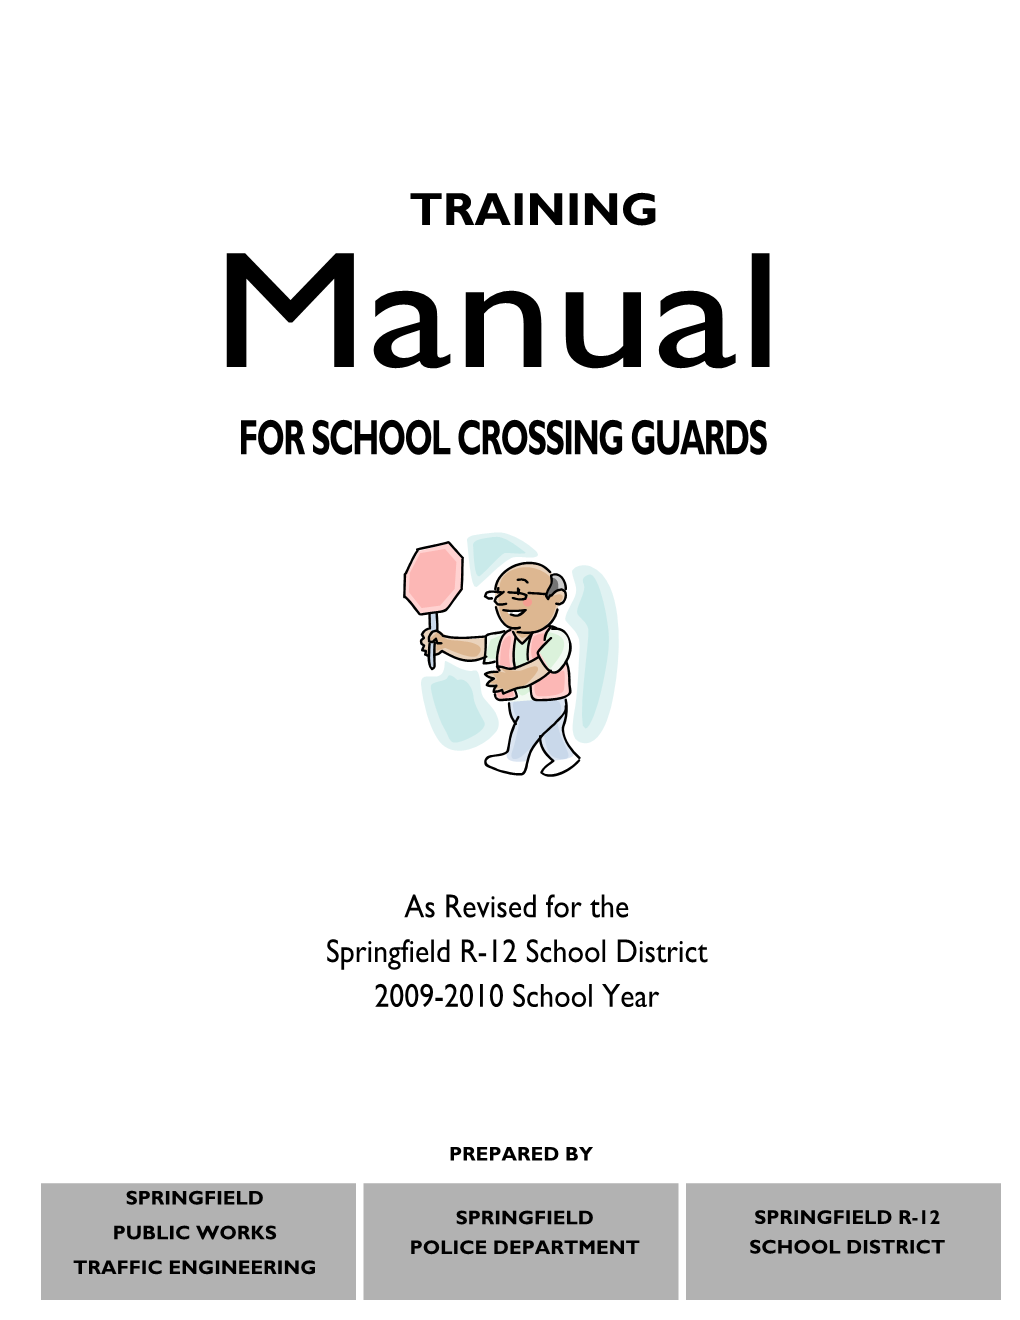 Training Manual for School Crossing Guards